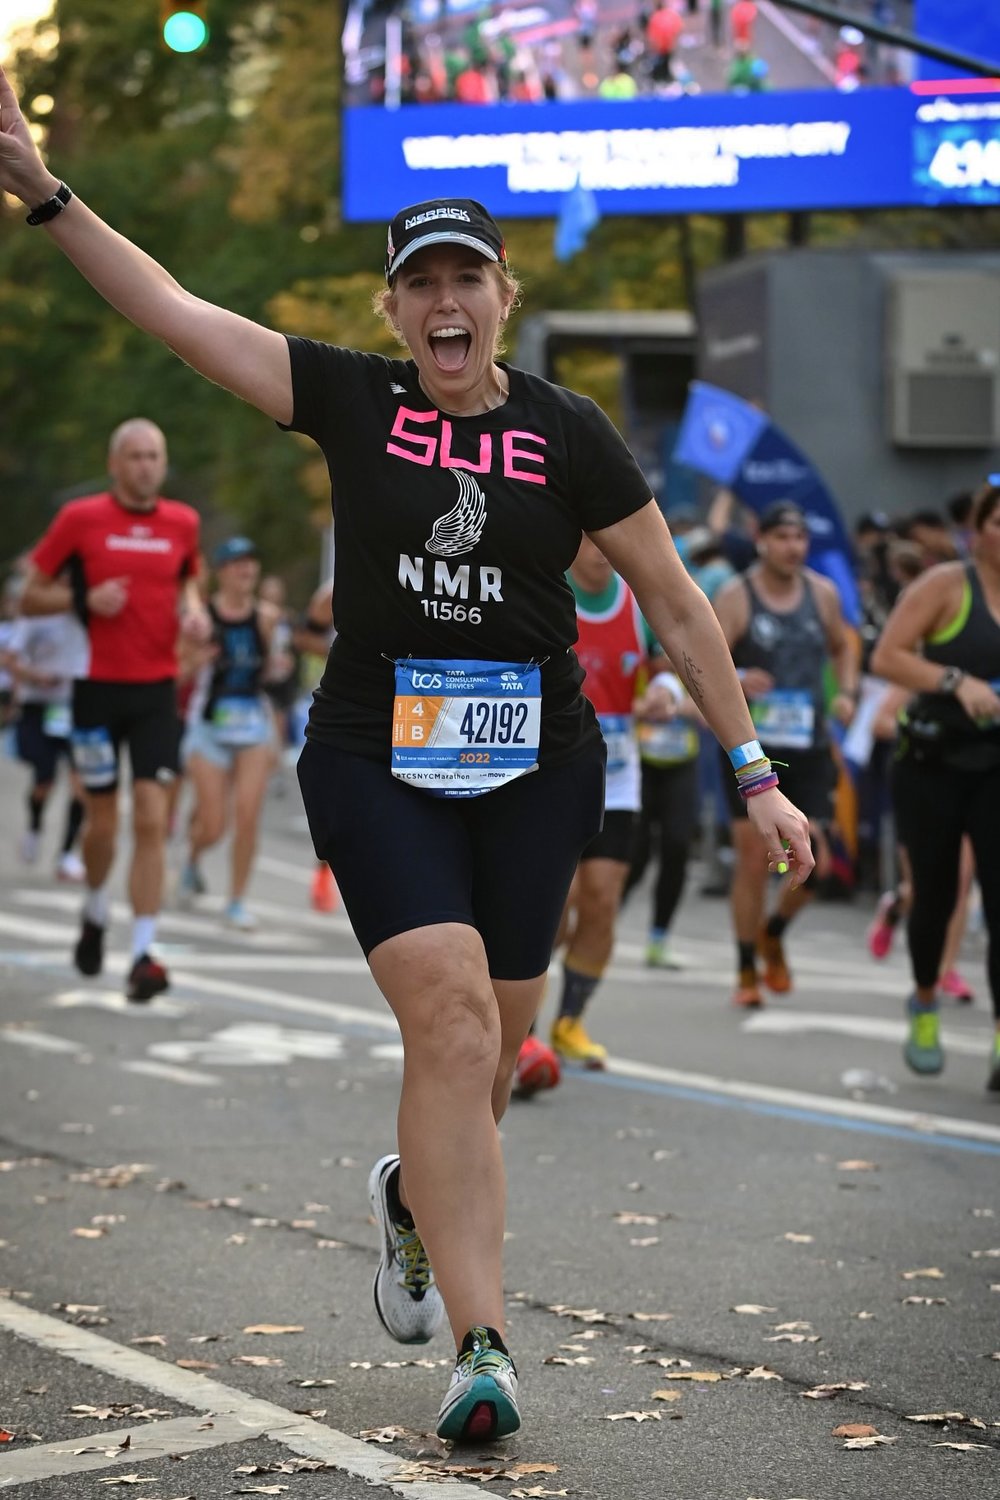 Sue Moller picked up running later in life, and just days before her first half-marathon, she was diagnosed with breast cancer. Now a two-time New York City marathon finisher, Moller said she believes anyone has what it takes to be a runner.